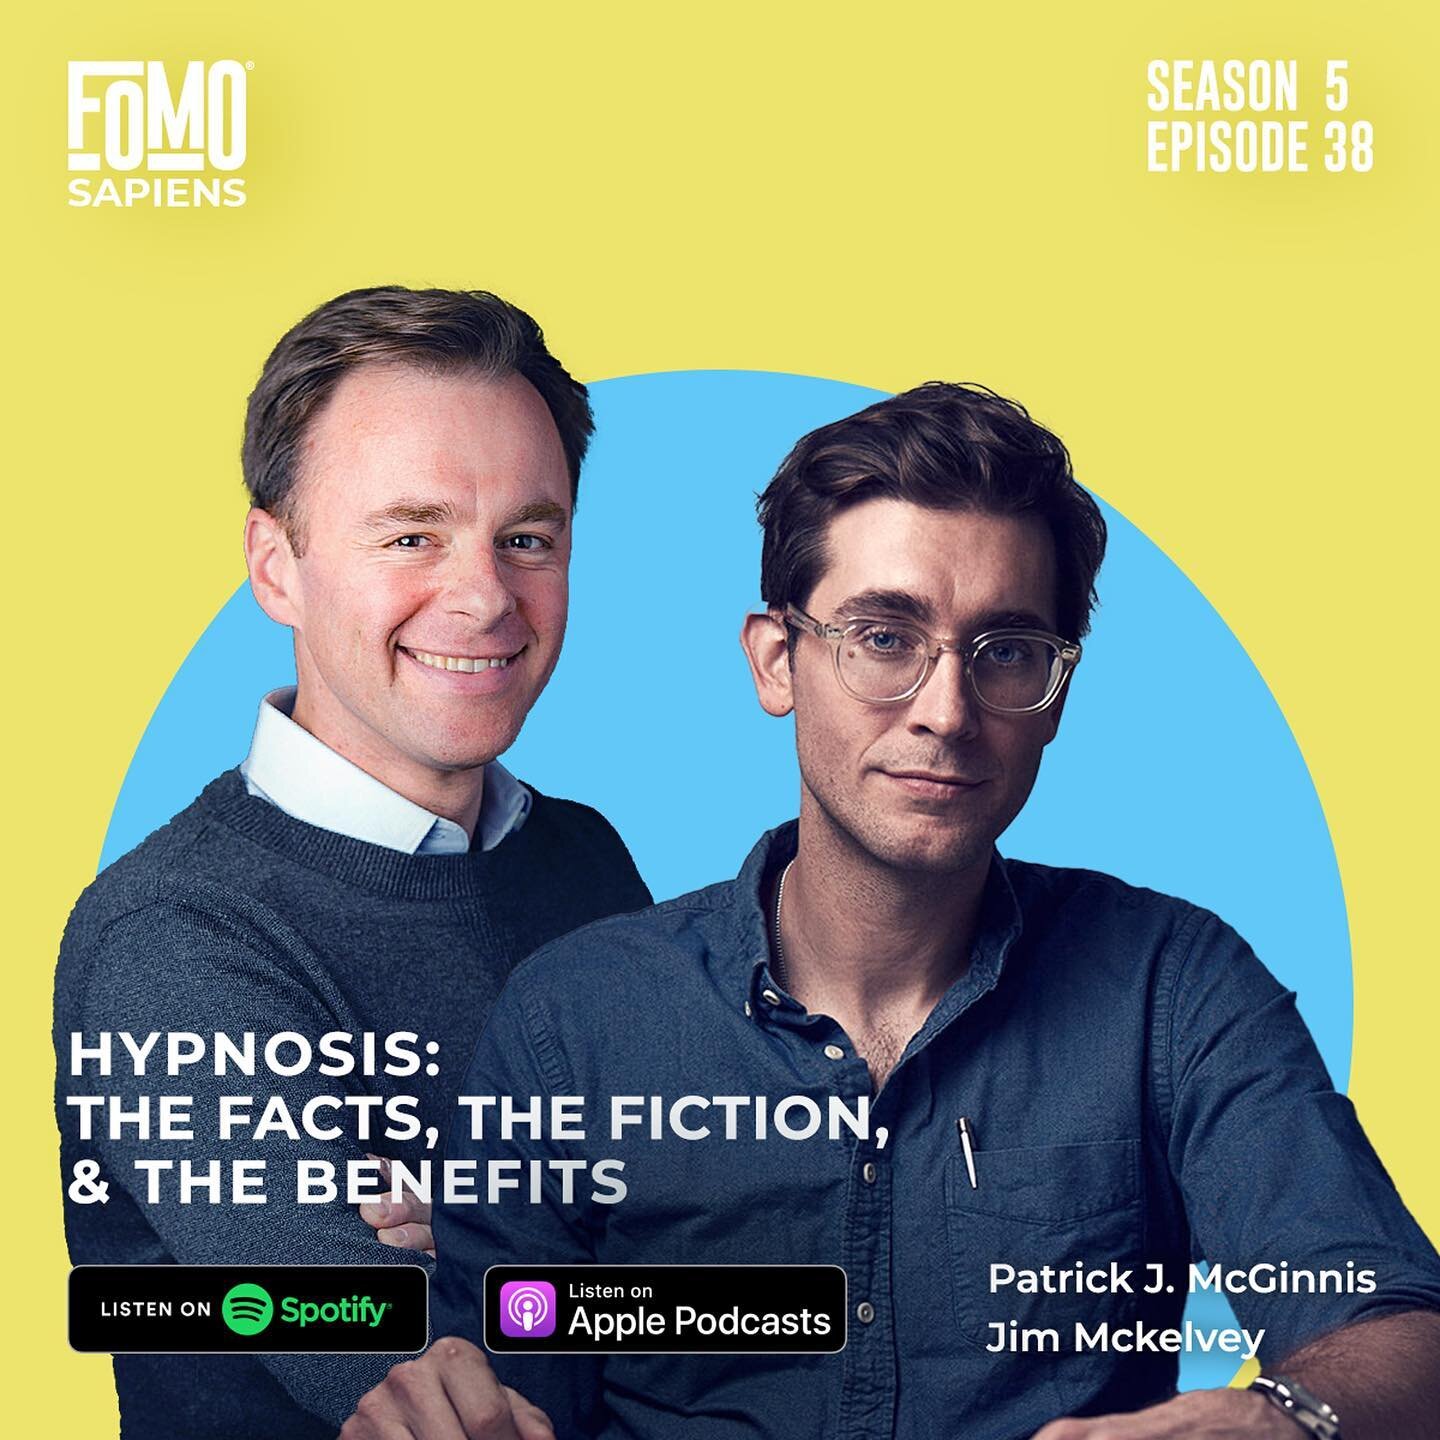 @patrickjmcginnis asks all the best questions. Honored and thrilled to be a recent guest on the outstanding @fomosapiens